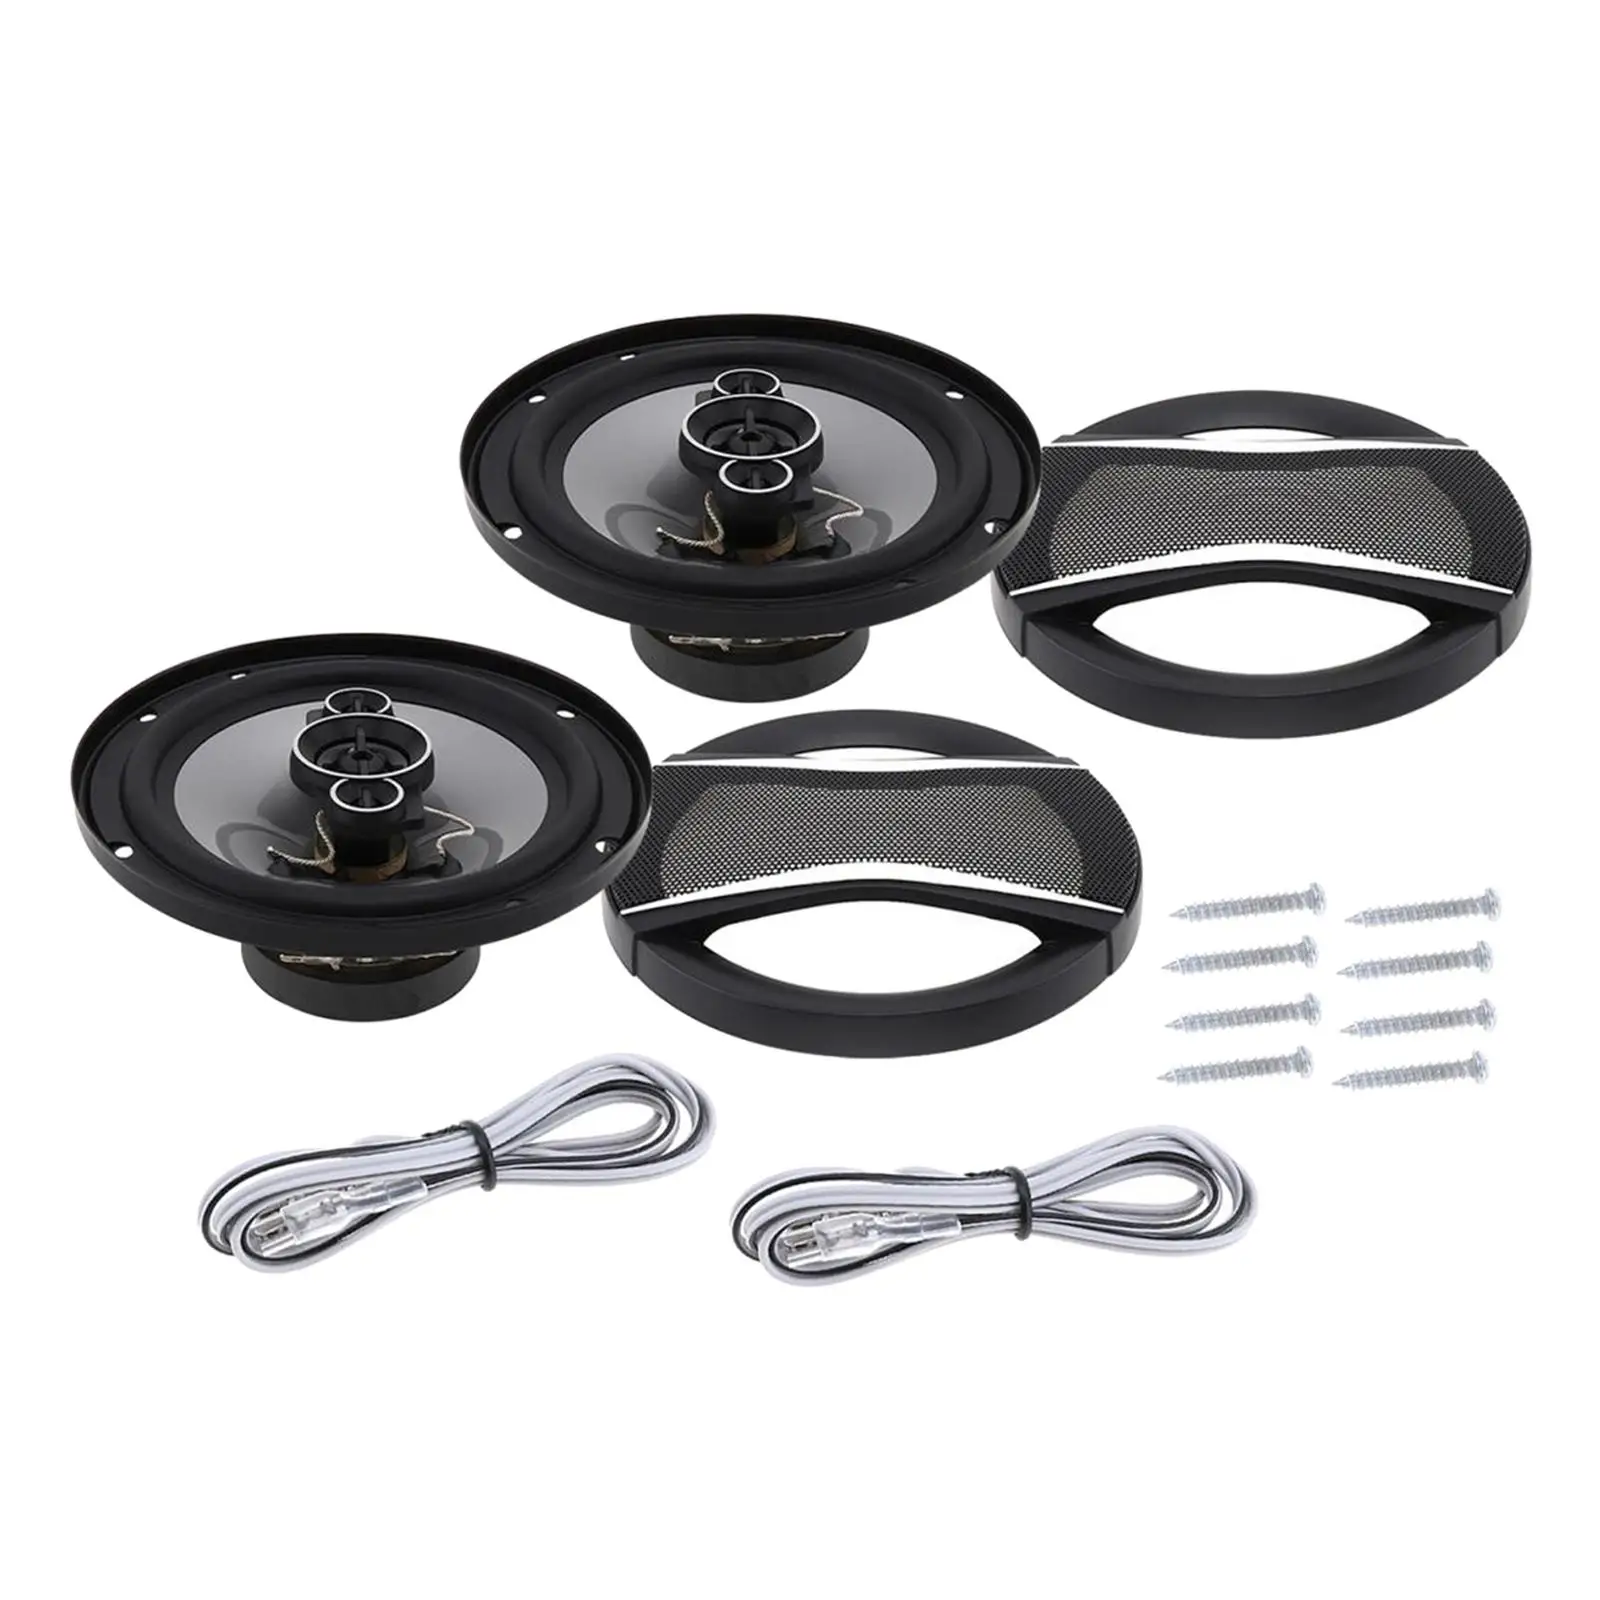 5 inch Car HiFi Coaxial Speaker Component Vehicle Speaker for Automobile SUV